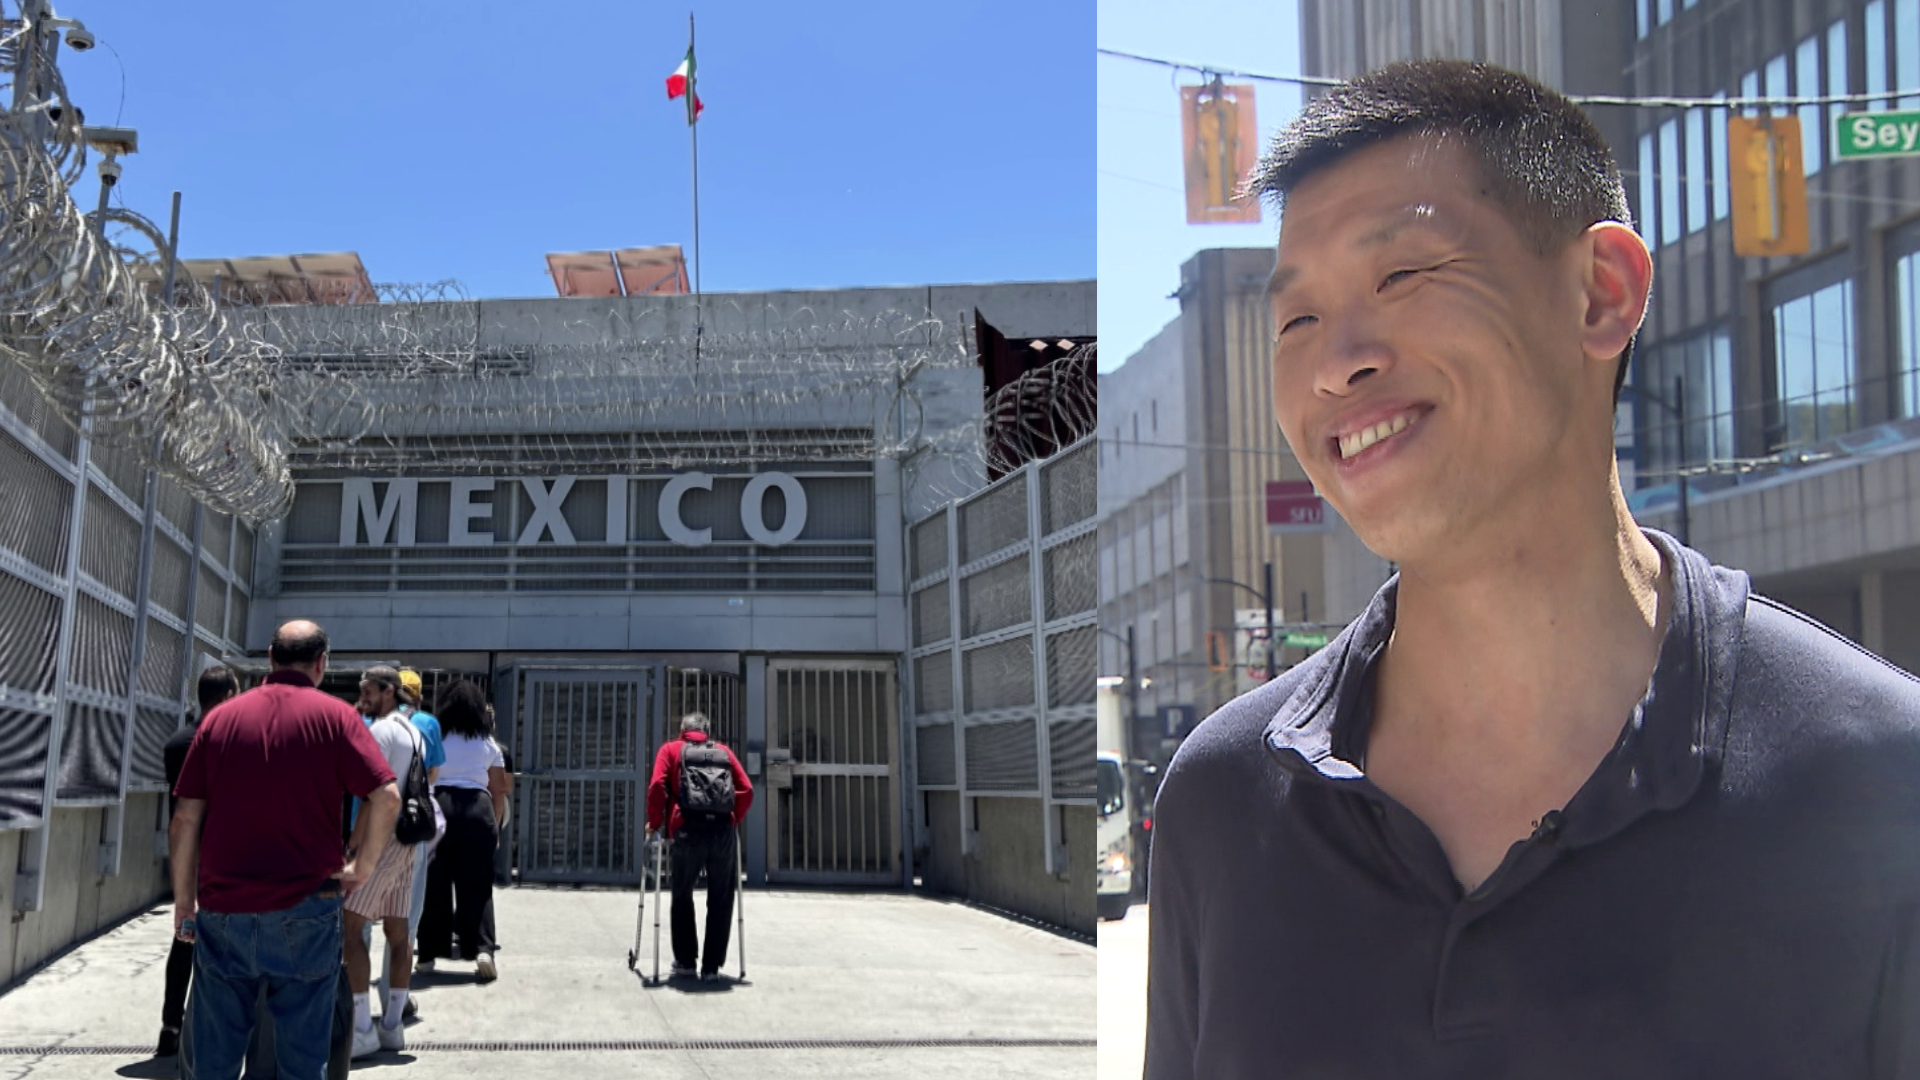 TransLink employee travels from Vancouver to Tijuana entirely by public transit